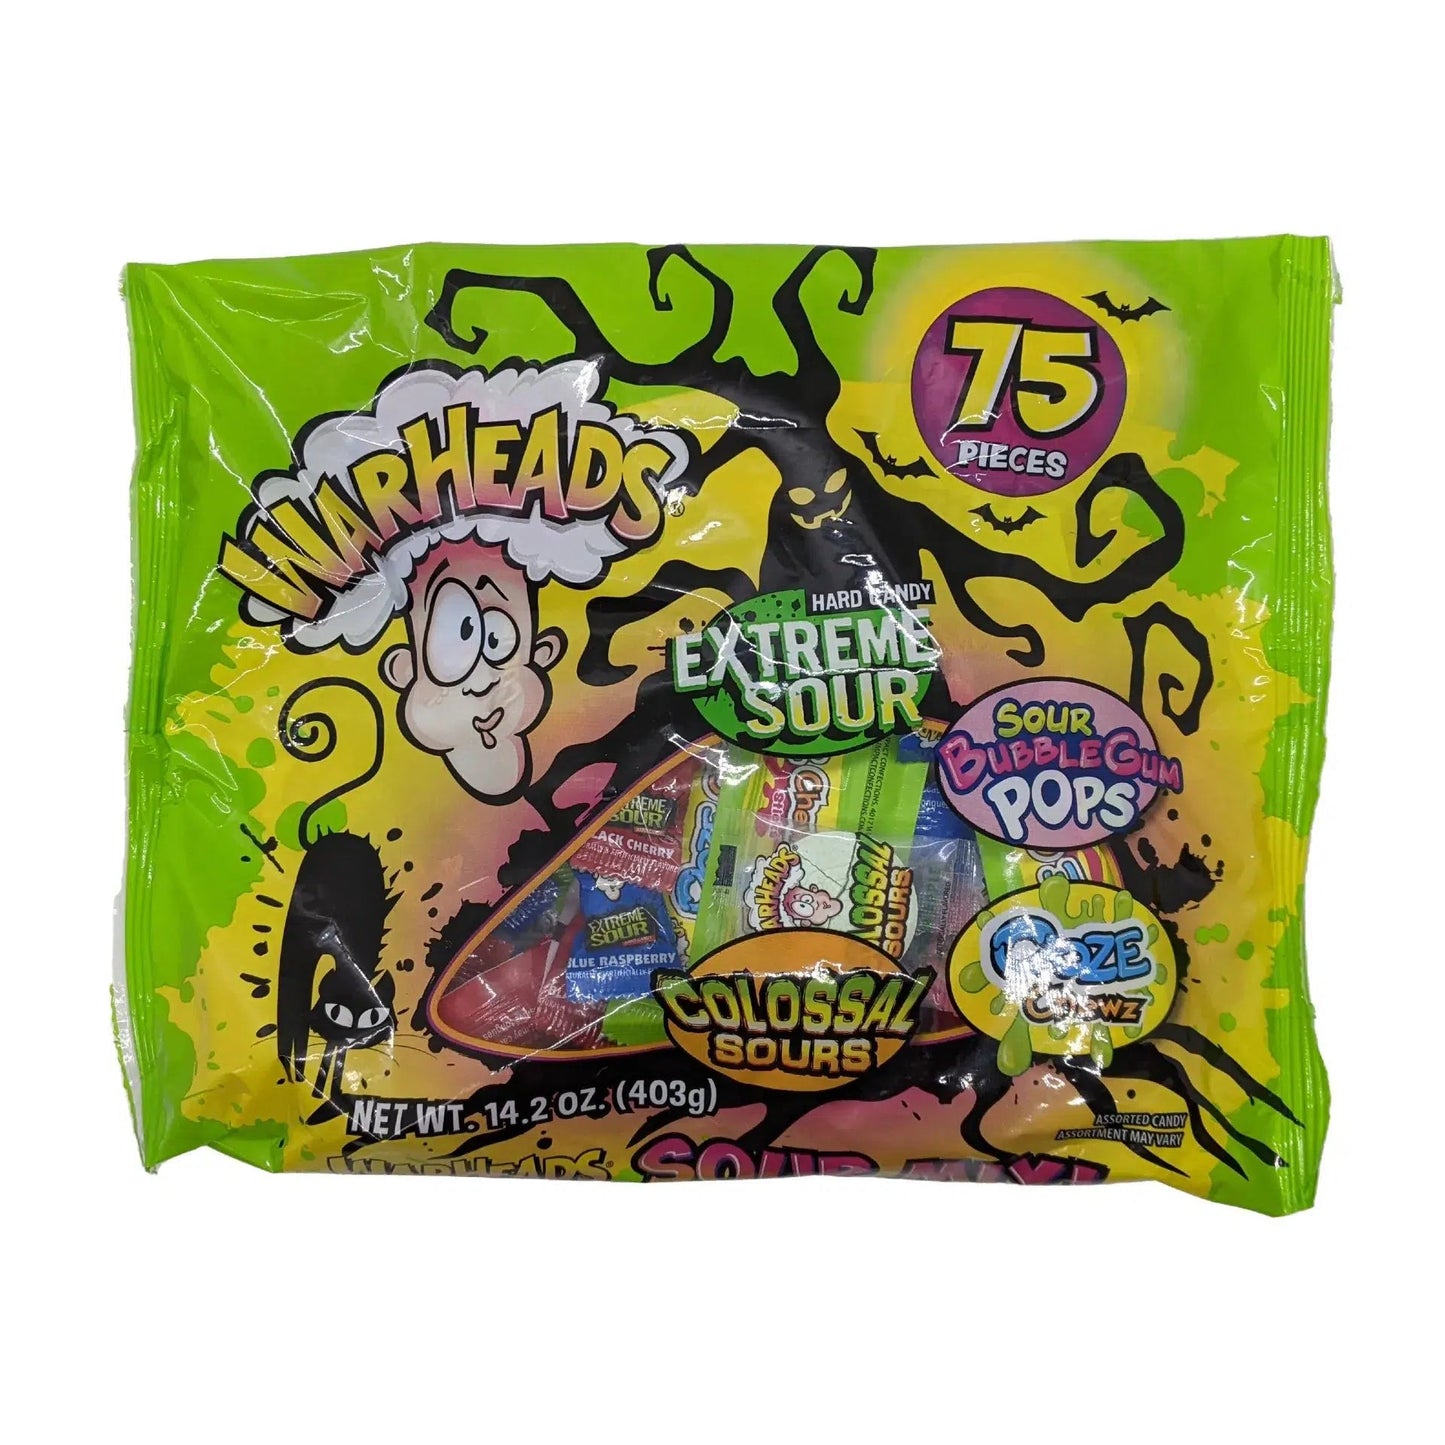 Warheads Halloween mix Candy 75 Pieces - Candy Mail UK